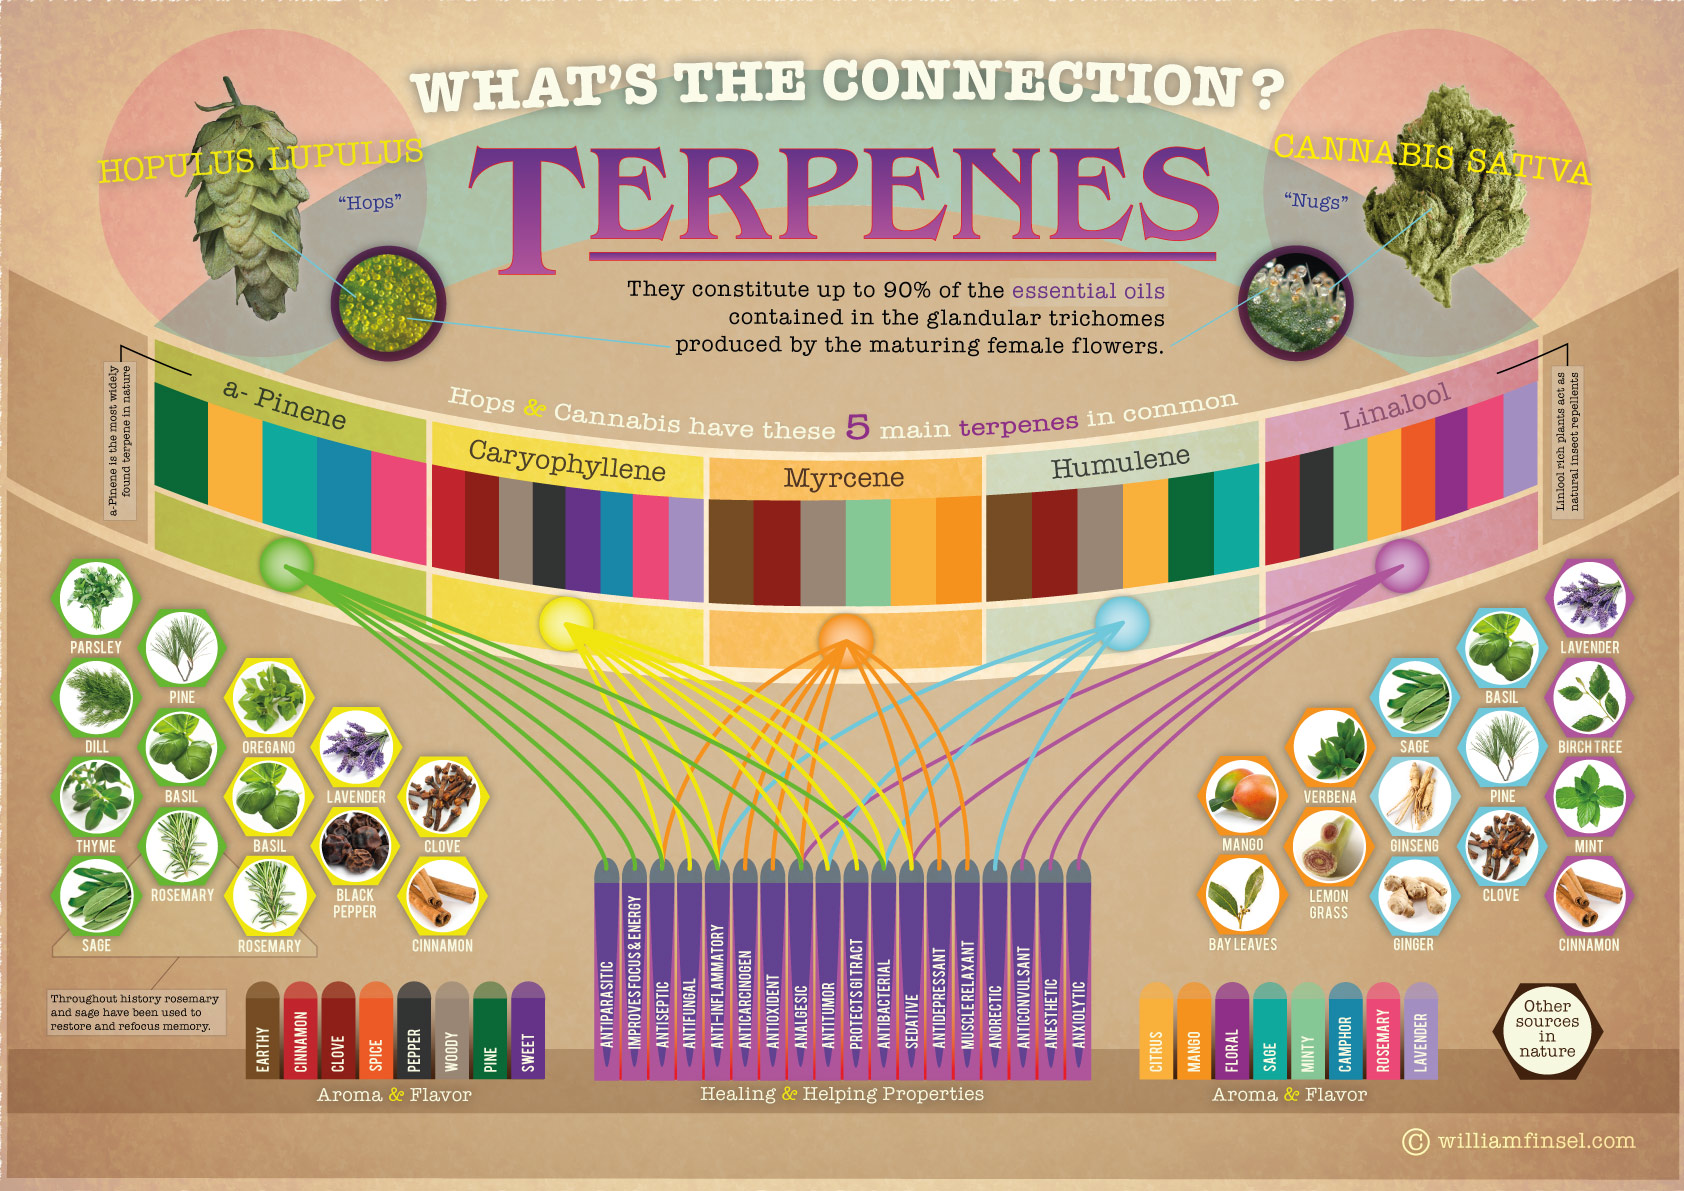 THE HISTORY OF TERPENES